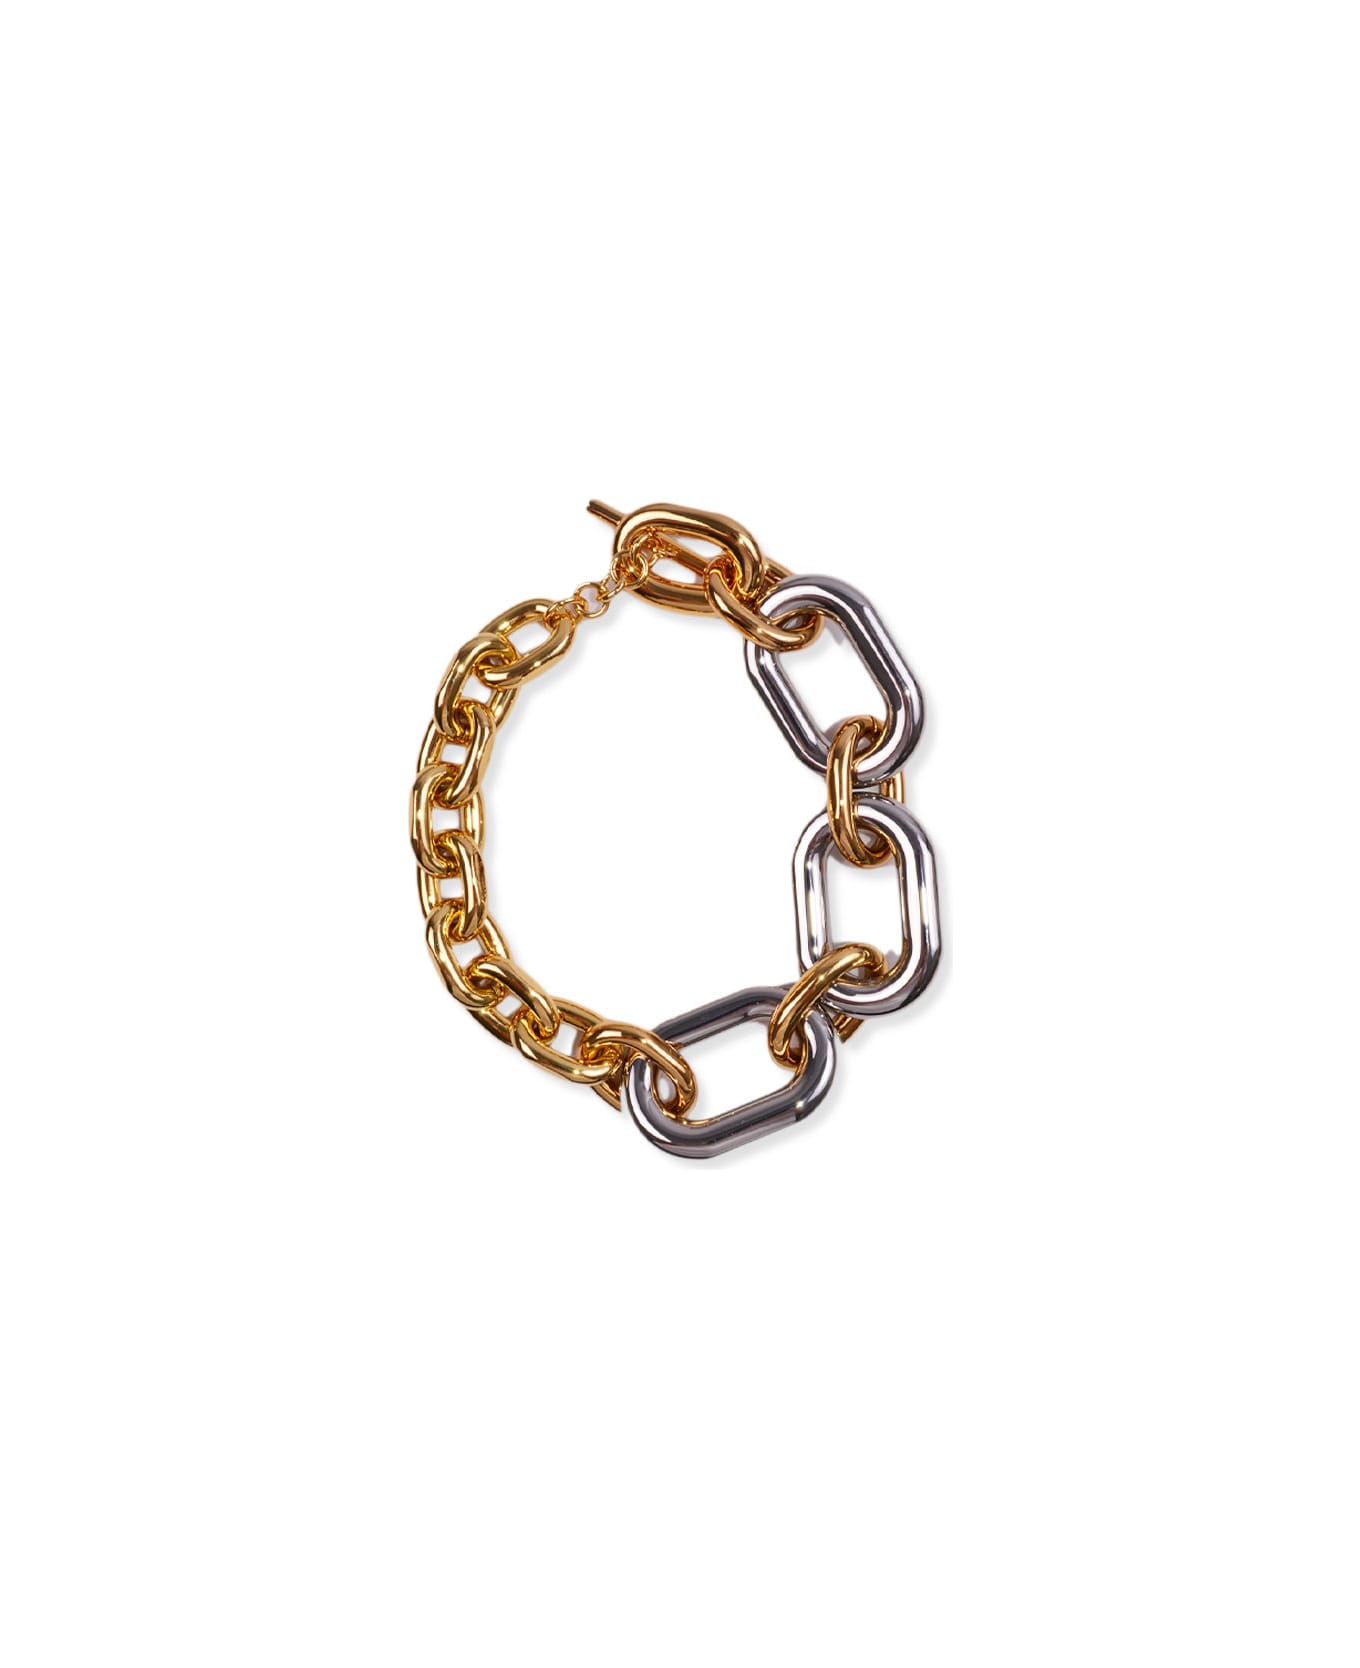 Paco Rabanne Necklace - Gold Silver